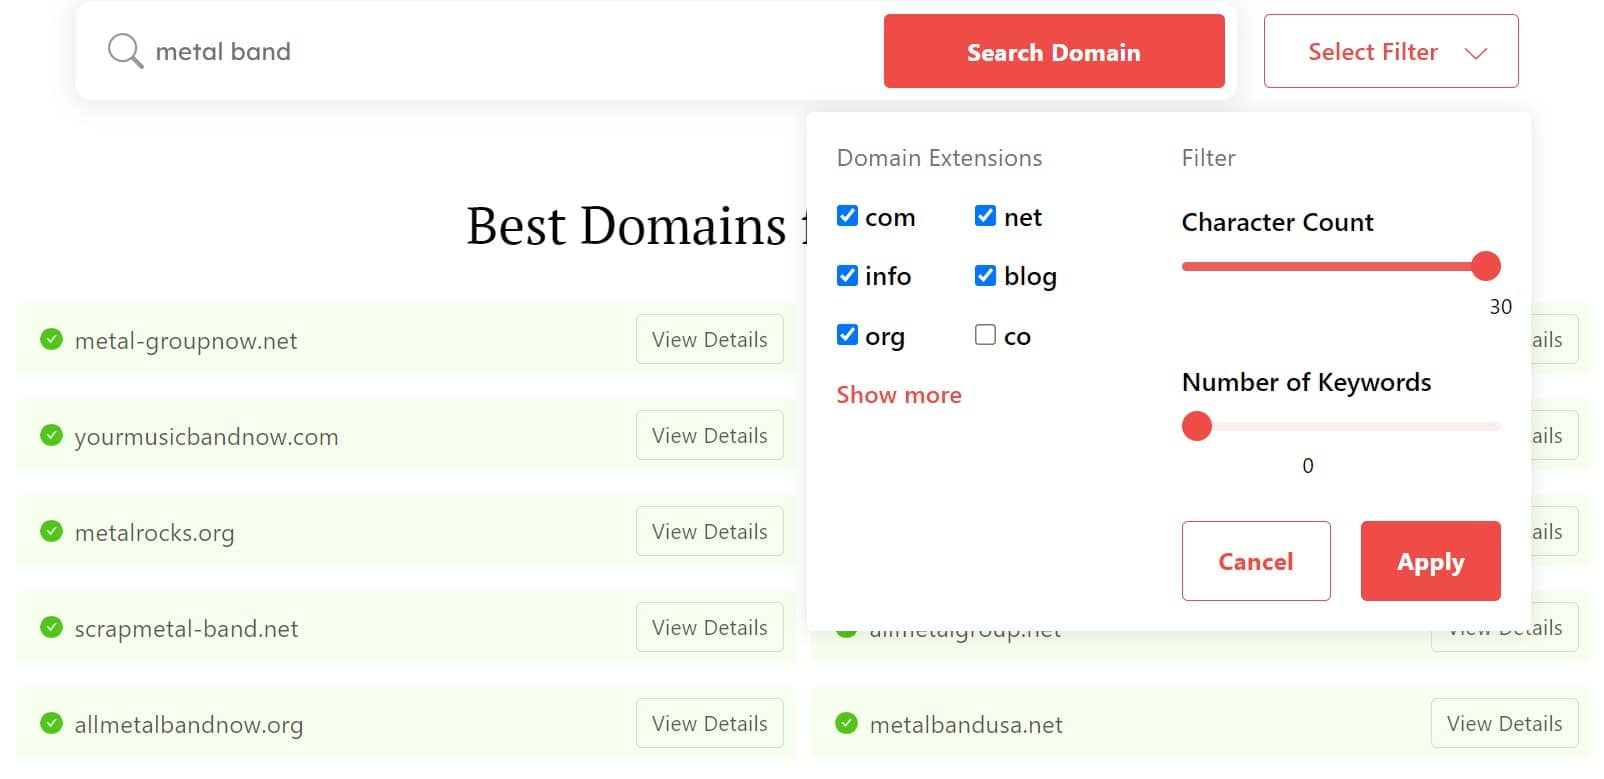 DomainWheel search filter options for domain extensions, character count, and number of keywords